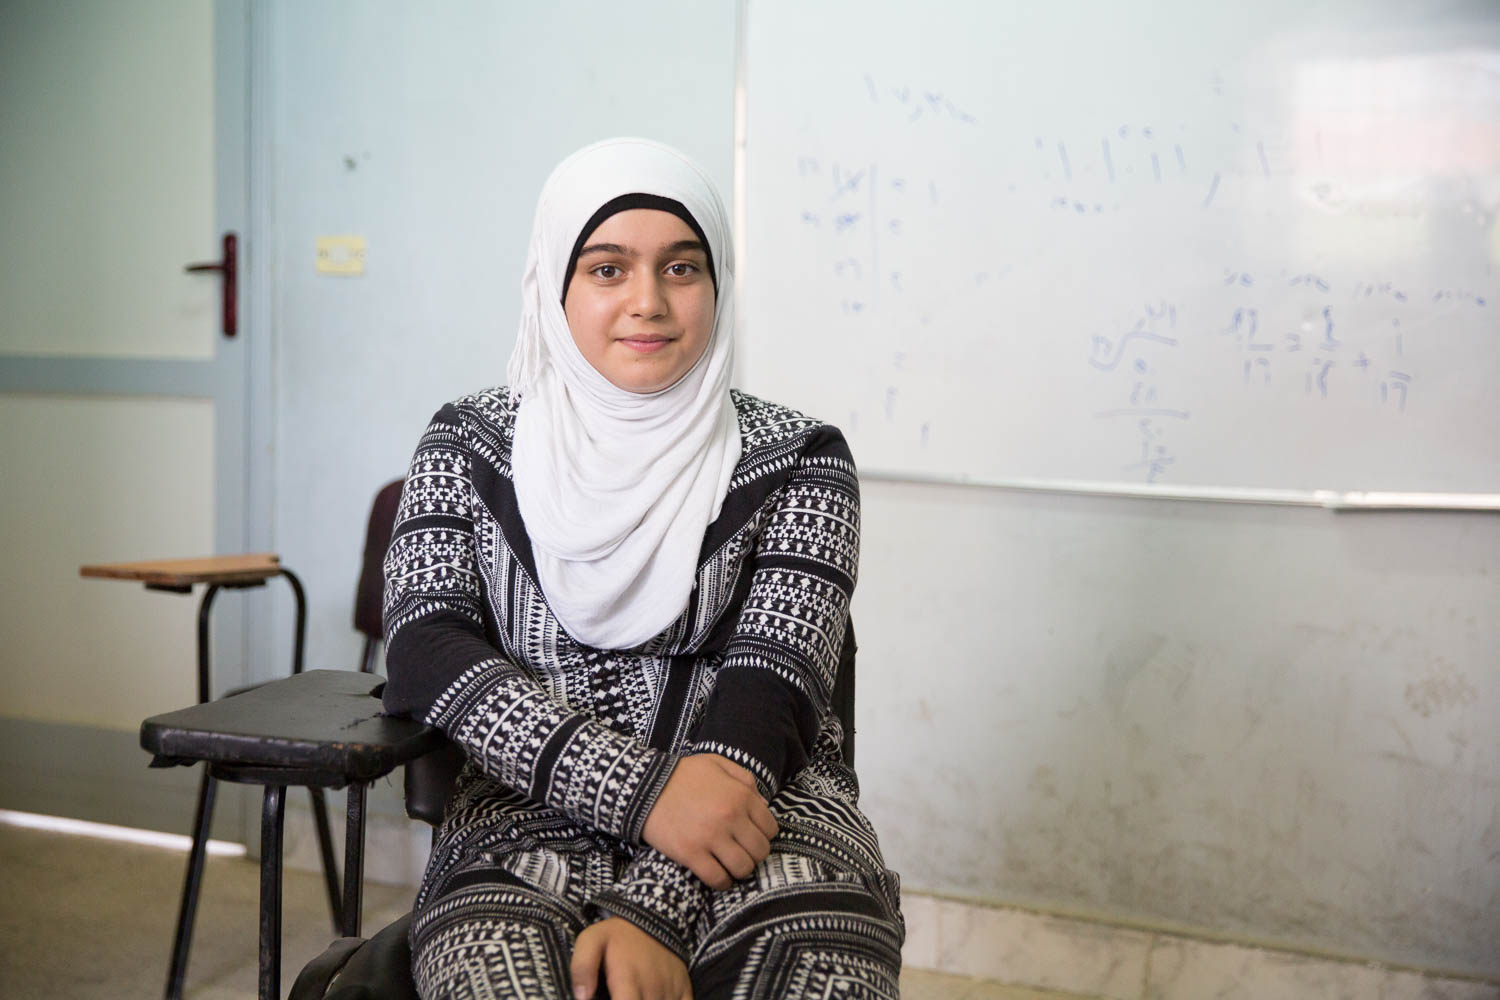  Abeer*, 15, is a student at the remedial classes offered by NGO Ansan and Plan International. Her family fled Syria and arrived in Egypt 2,5 years ago. Her life is completely different now than before. In Syria she would be allowed to hang out with her friends, while here she is only allowed to see them at school, and she is not allowed to leave the home by herself due to safety concerns. Her family goes on a family trip once a month, besides that they stay at home. In her free time she likes to draw, watch TV and play sports. She hopes to obtain a PhD in pharmaceutical studies and to open a large chain of pharmacies. Her favorite film is Frozen. 